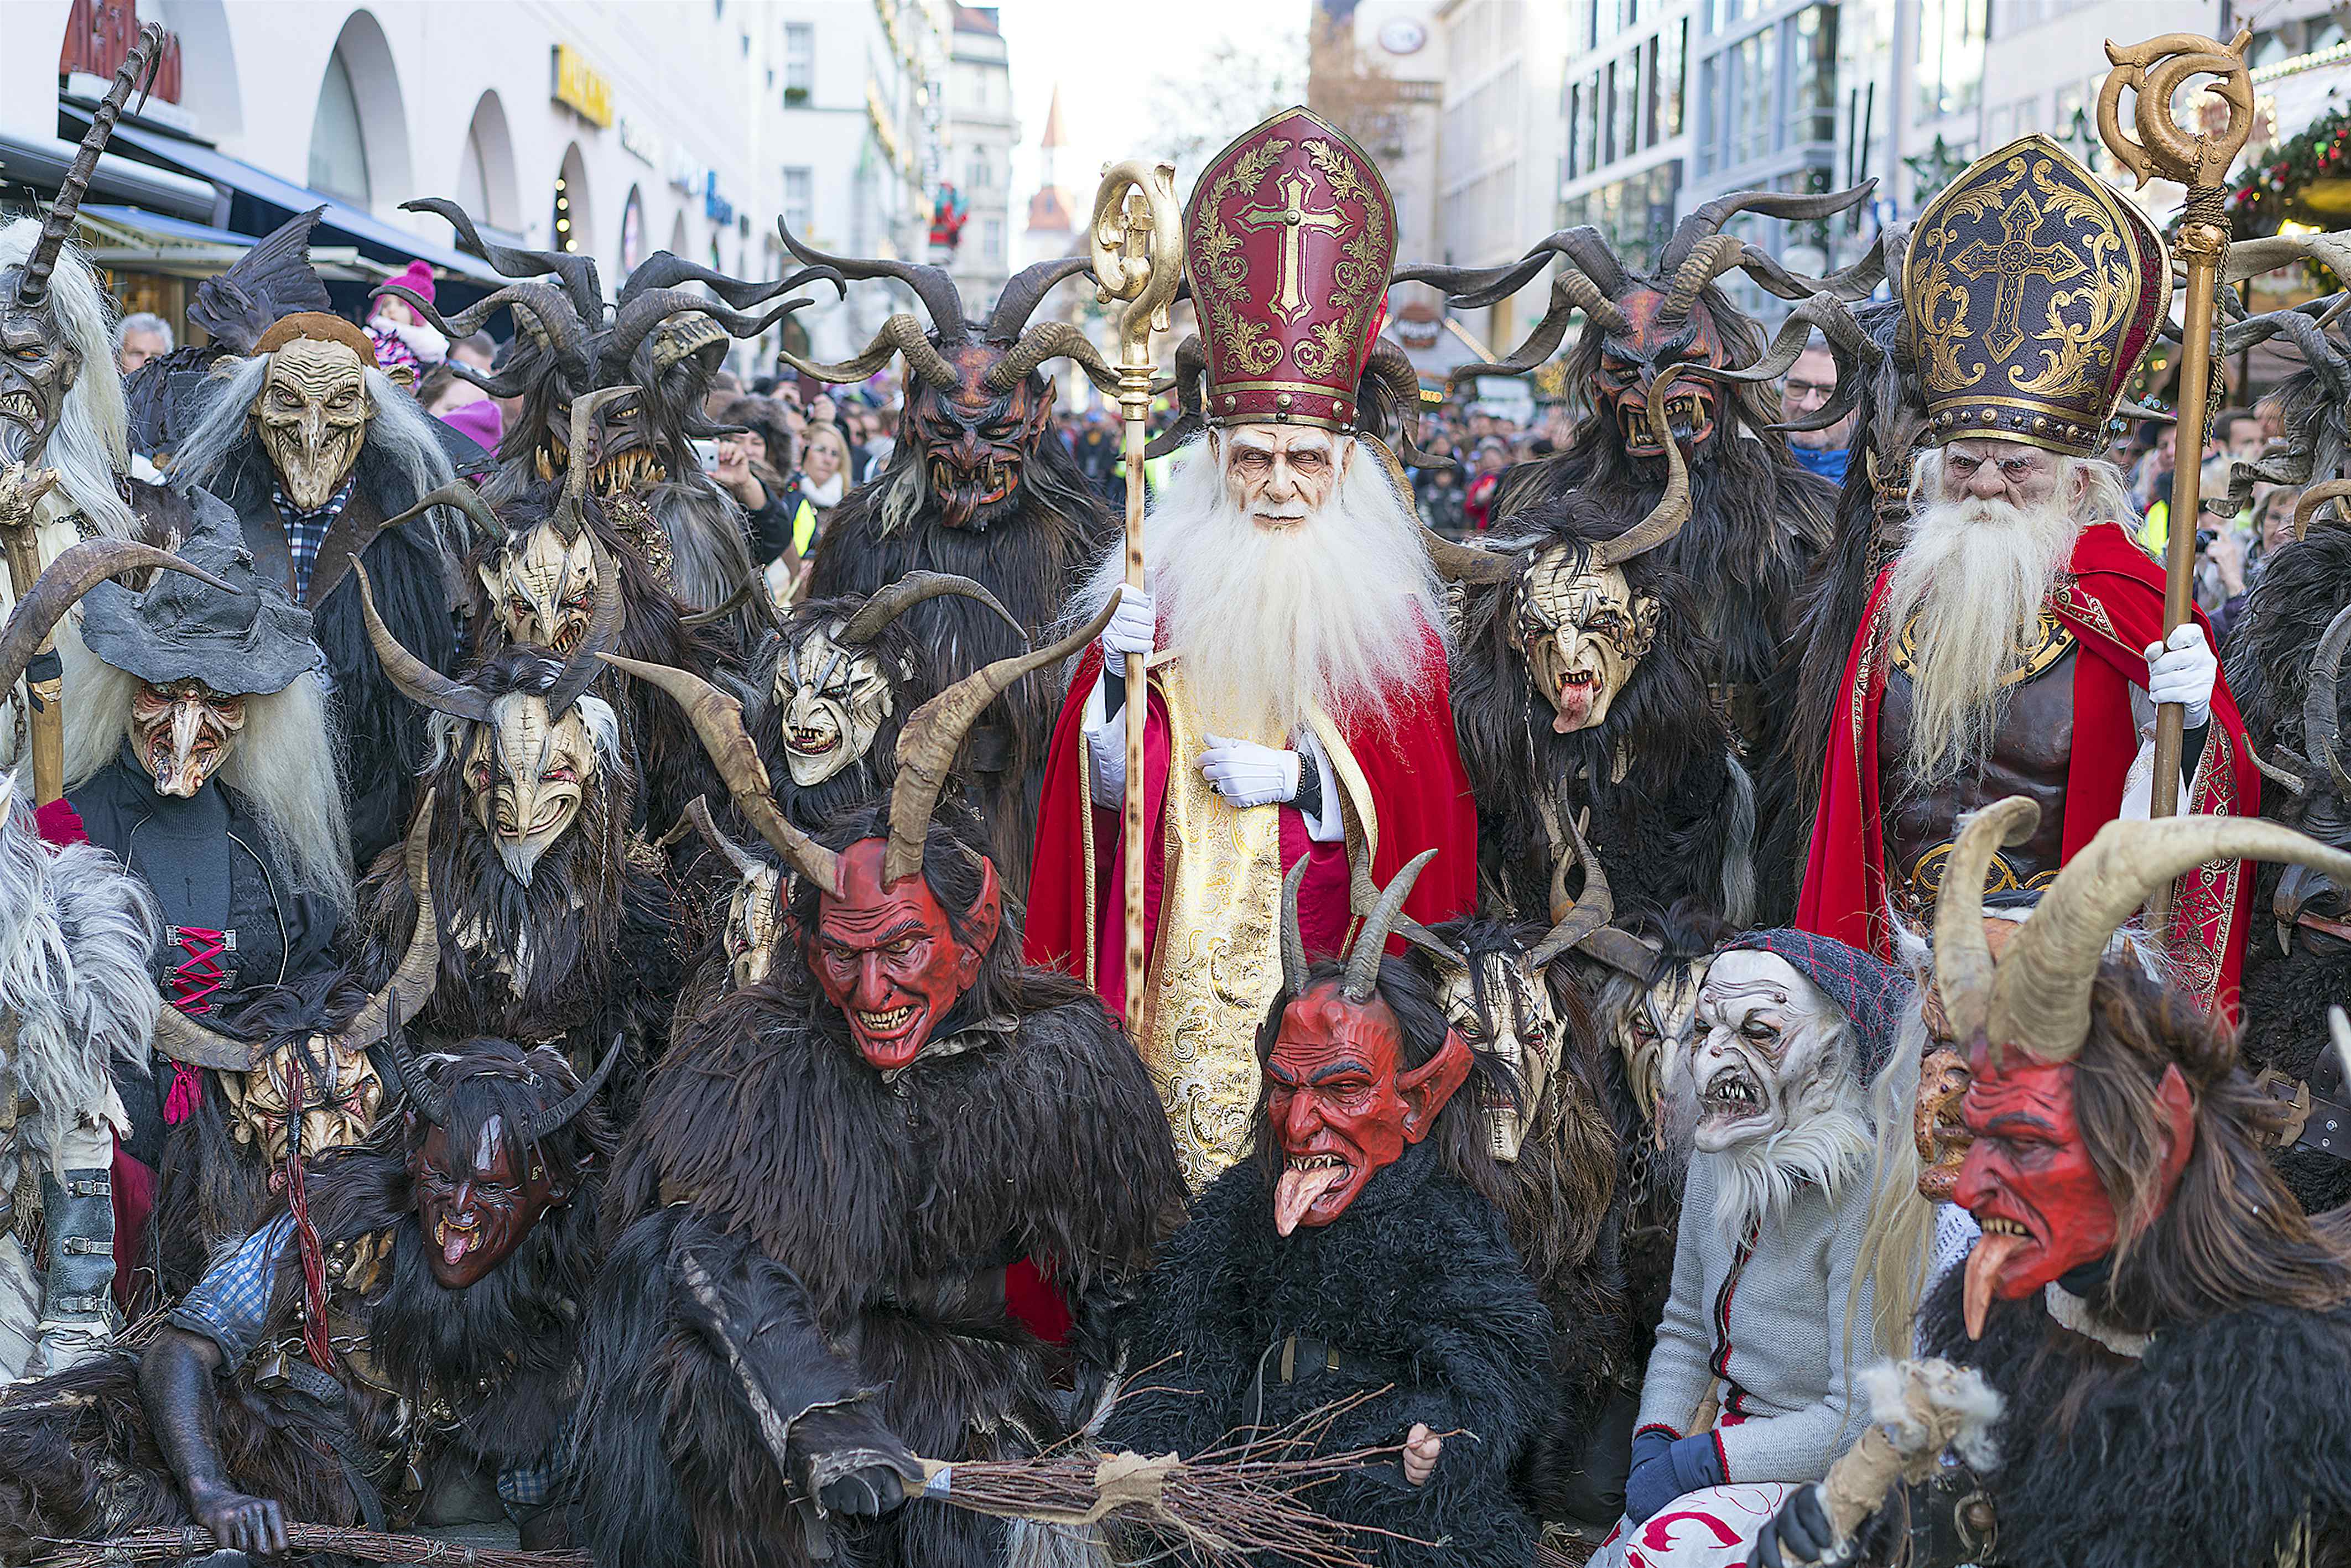 Why the Krampus parade is a Munich holiday you don't want to miss